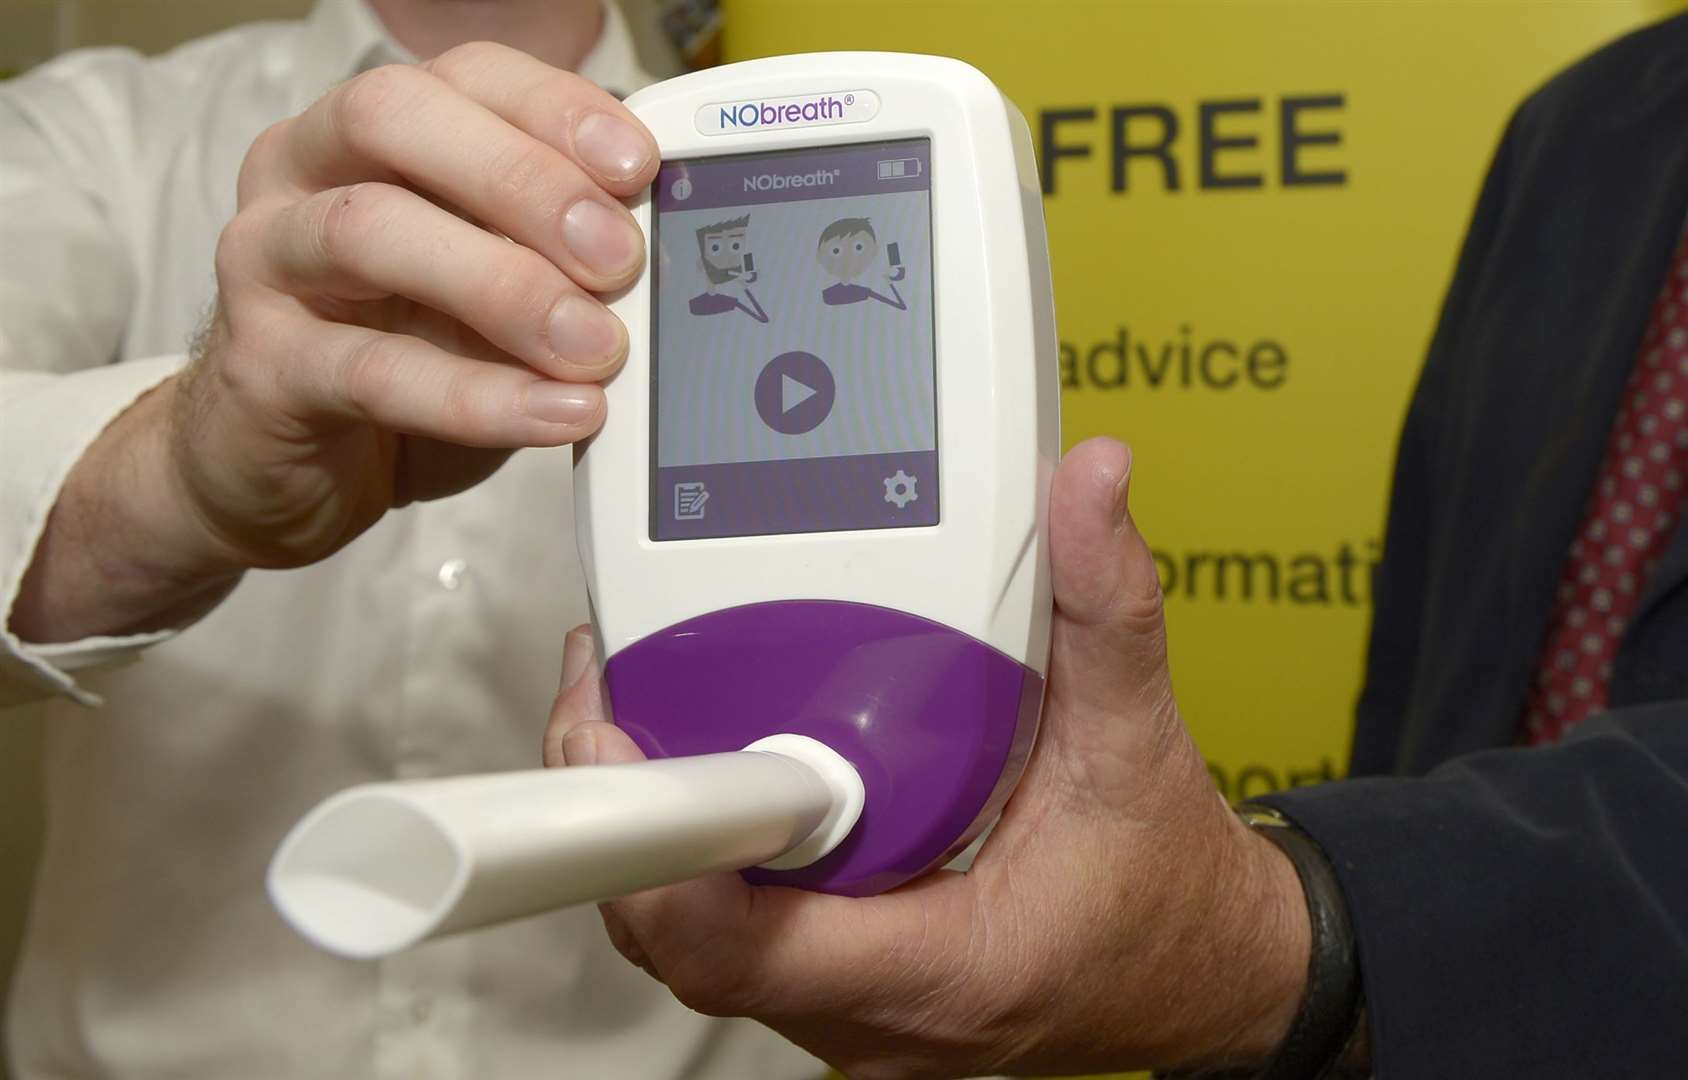 The NObreath is normally used to diagnose asthma